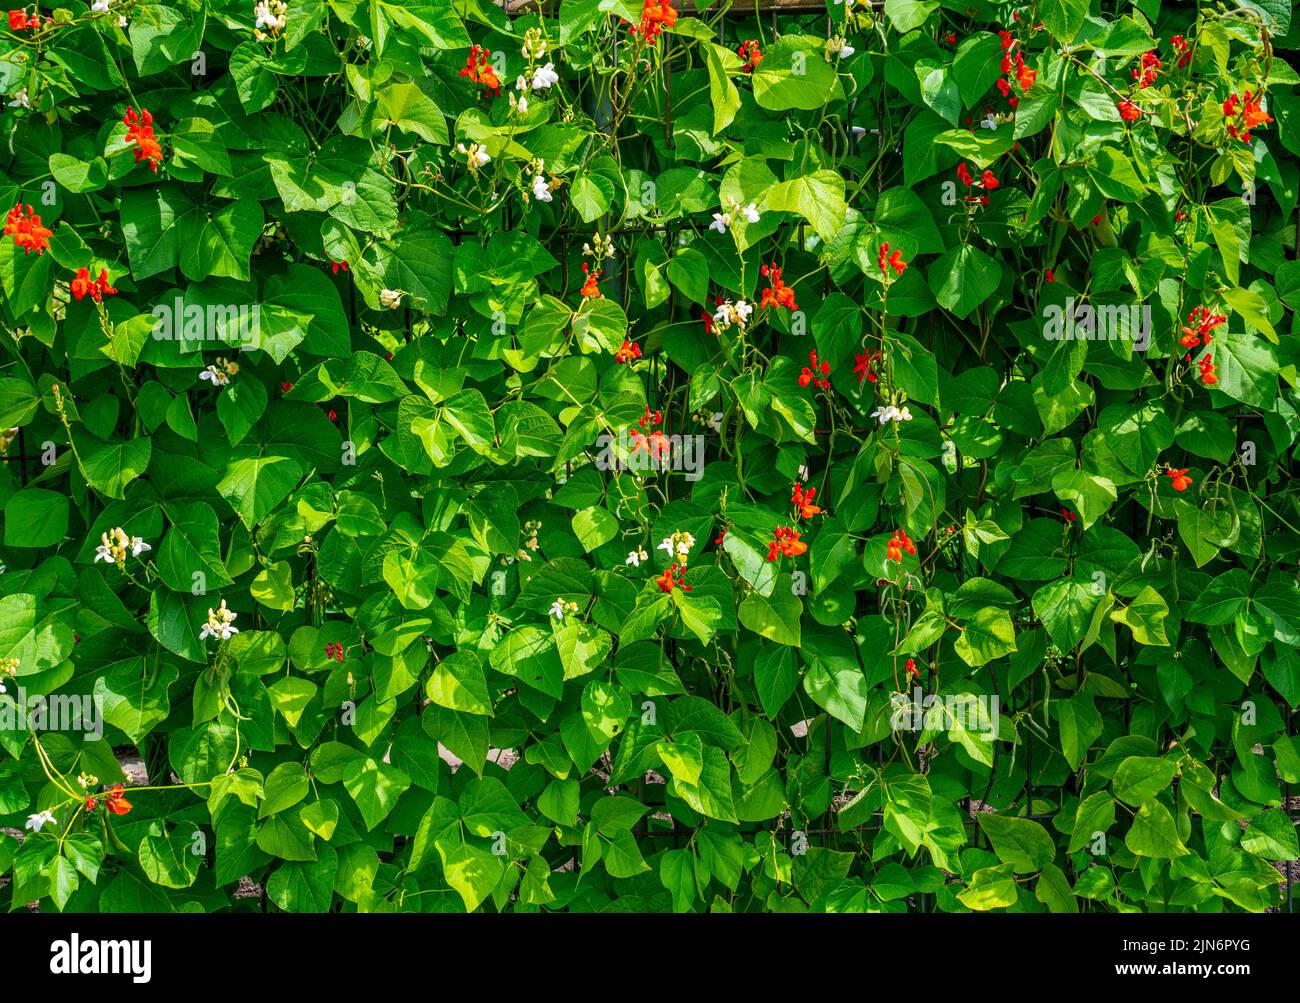 Background of beans growing in a garden with red and white flowers (phaseolus coccineus) Stock Photo